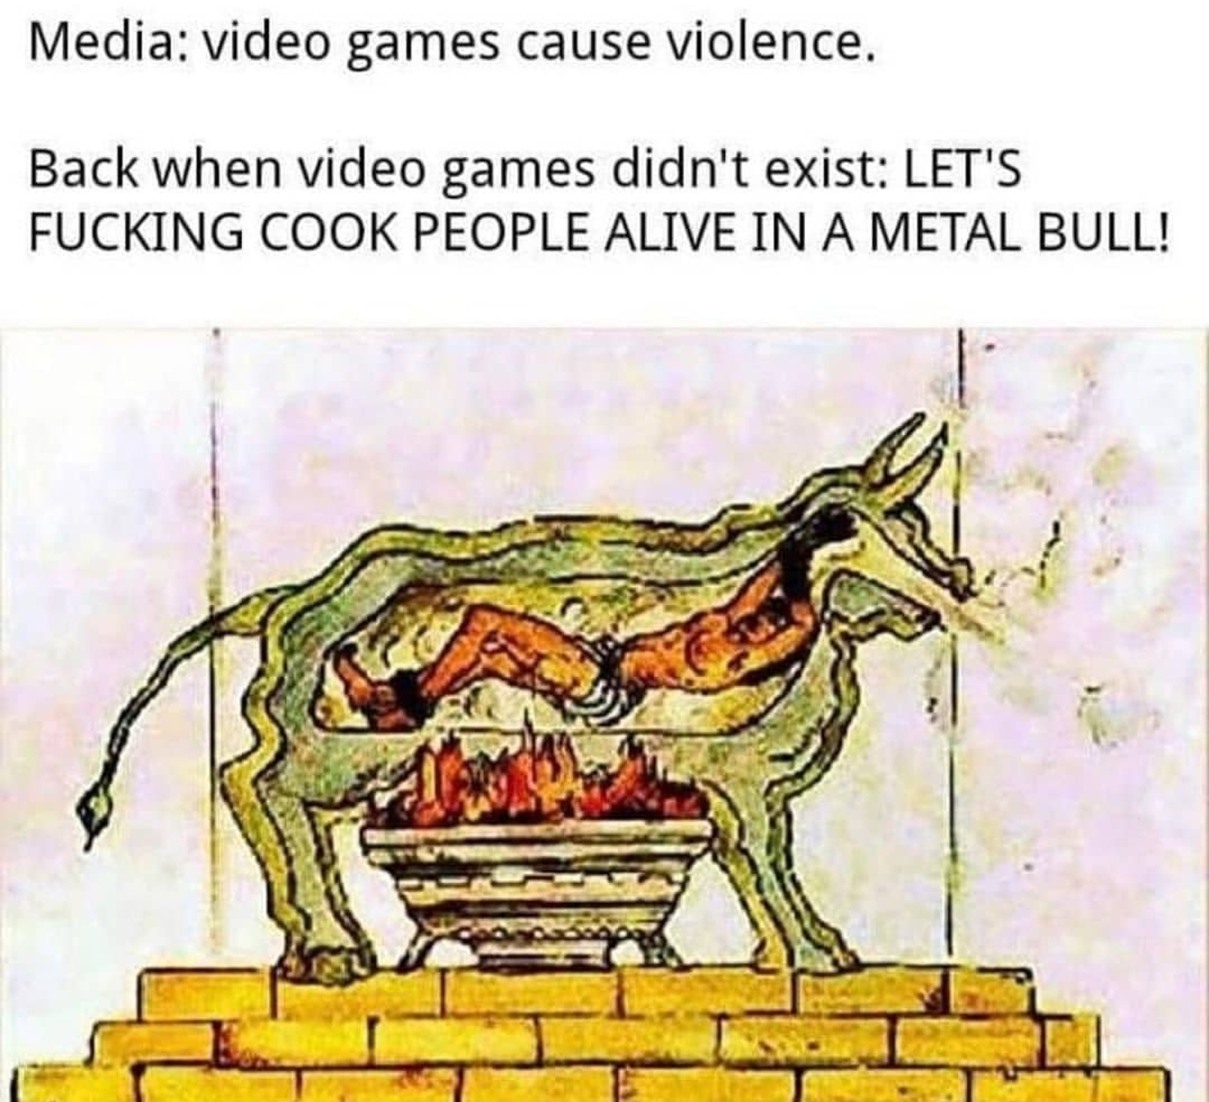 In ancient times, Beef cooks you - meme